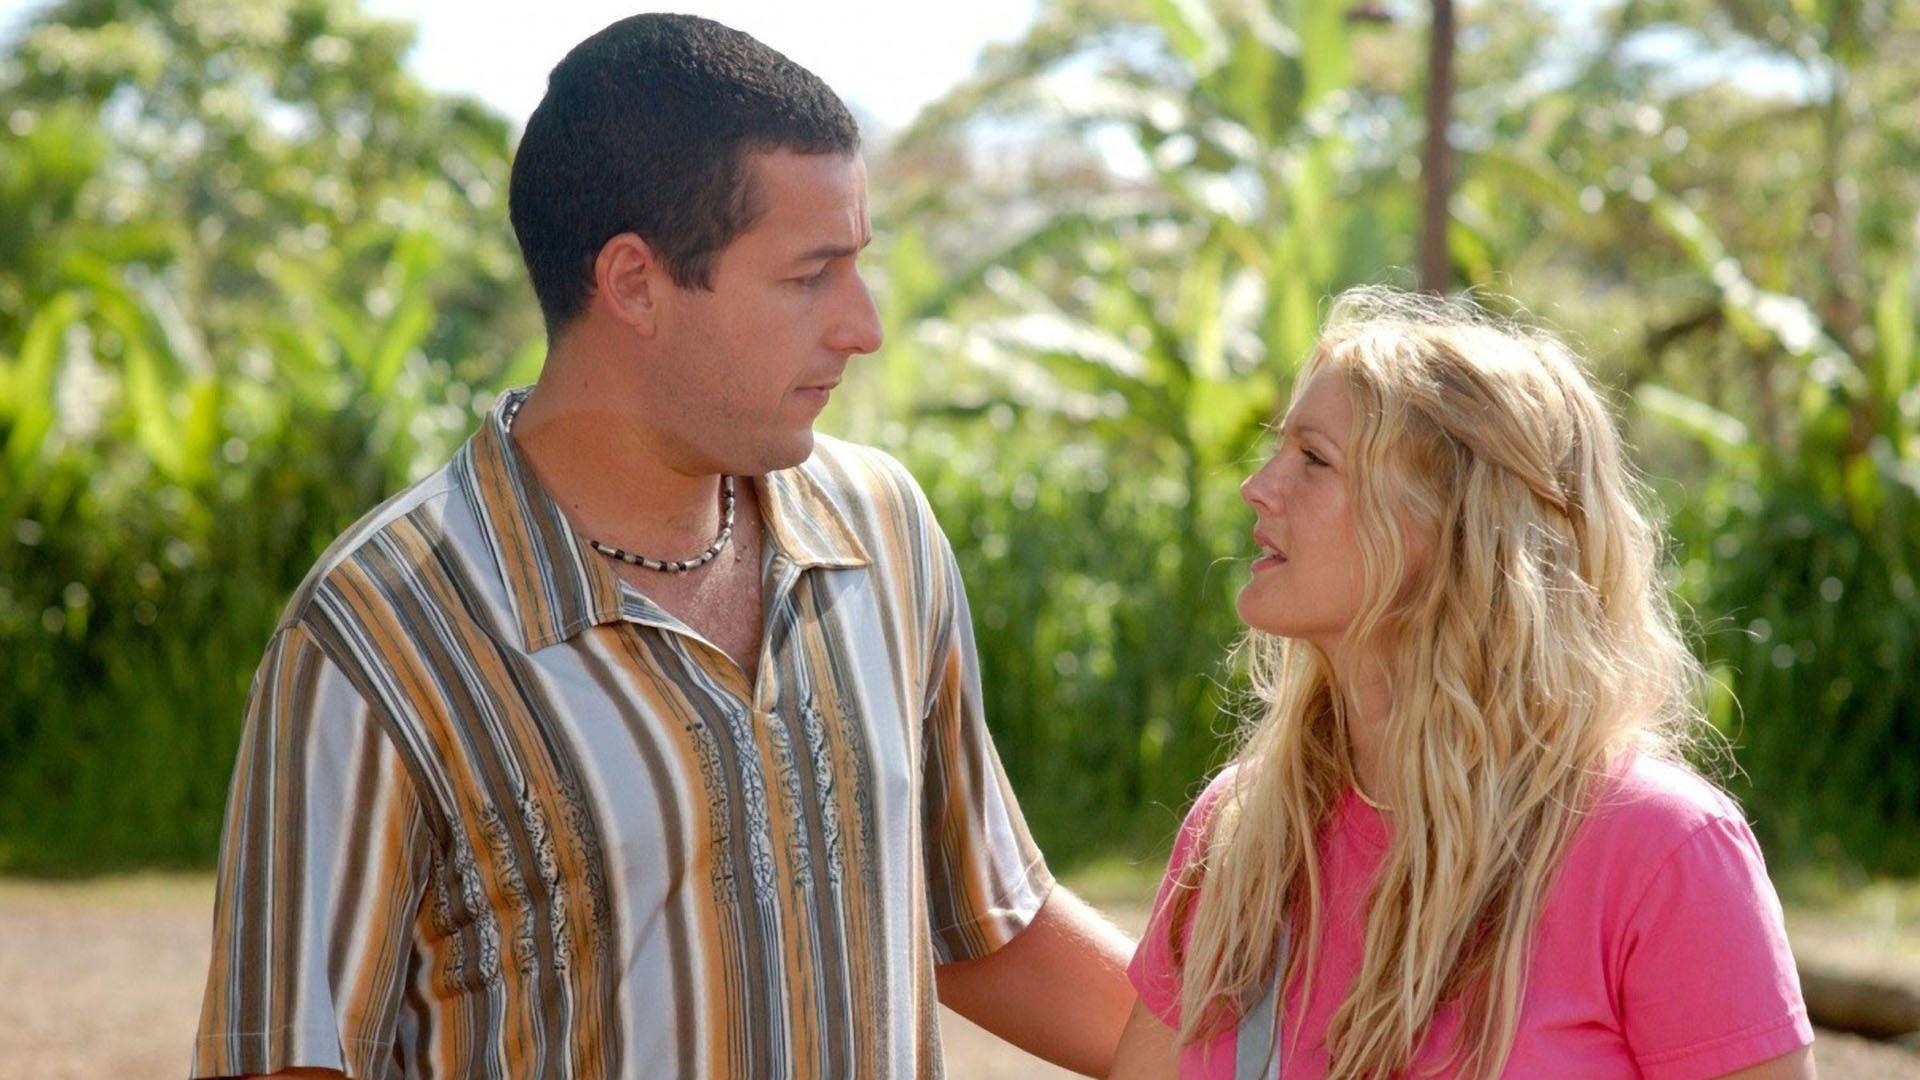 50 first dates movie poster hd download